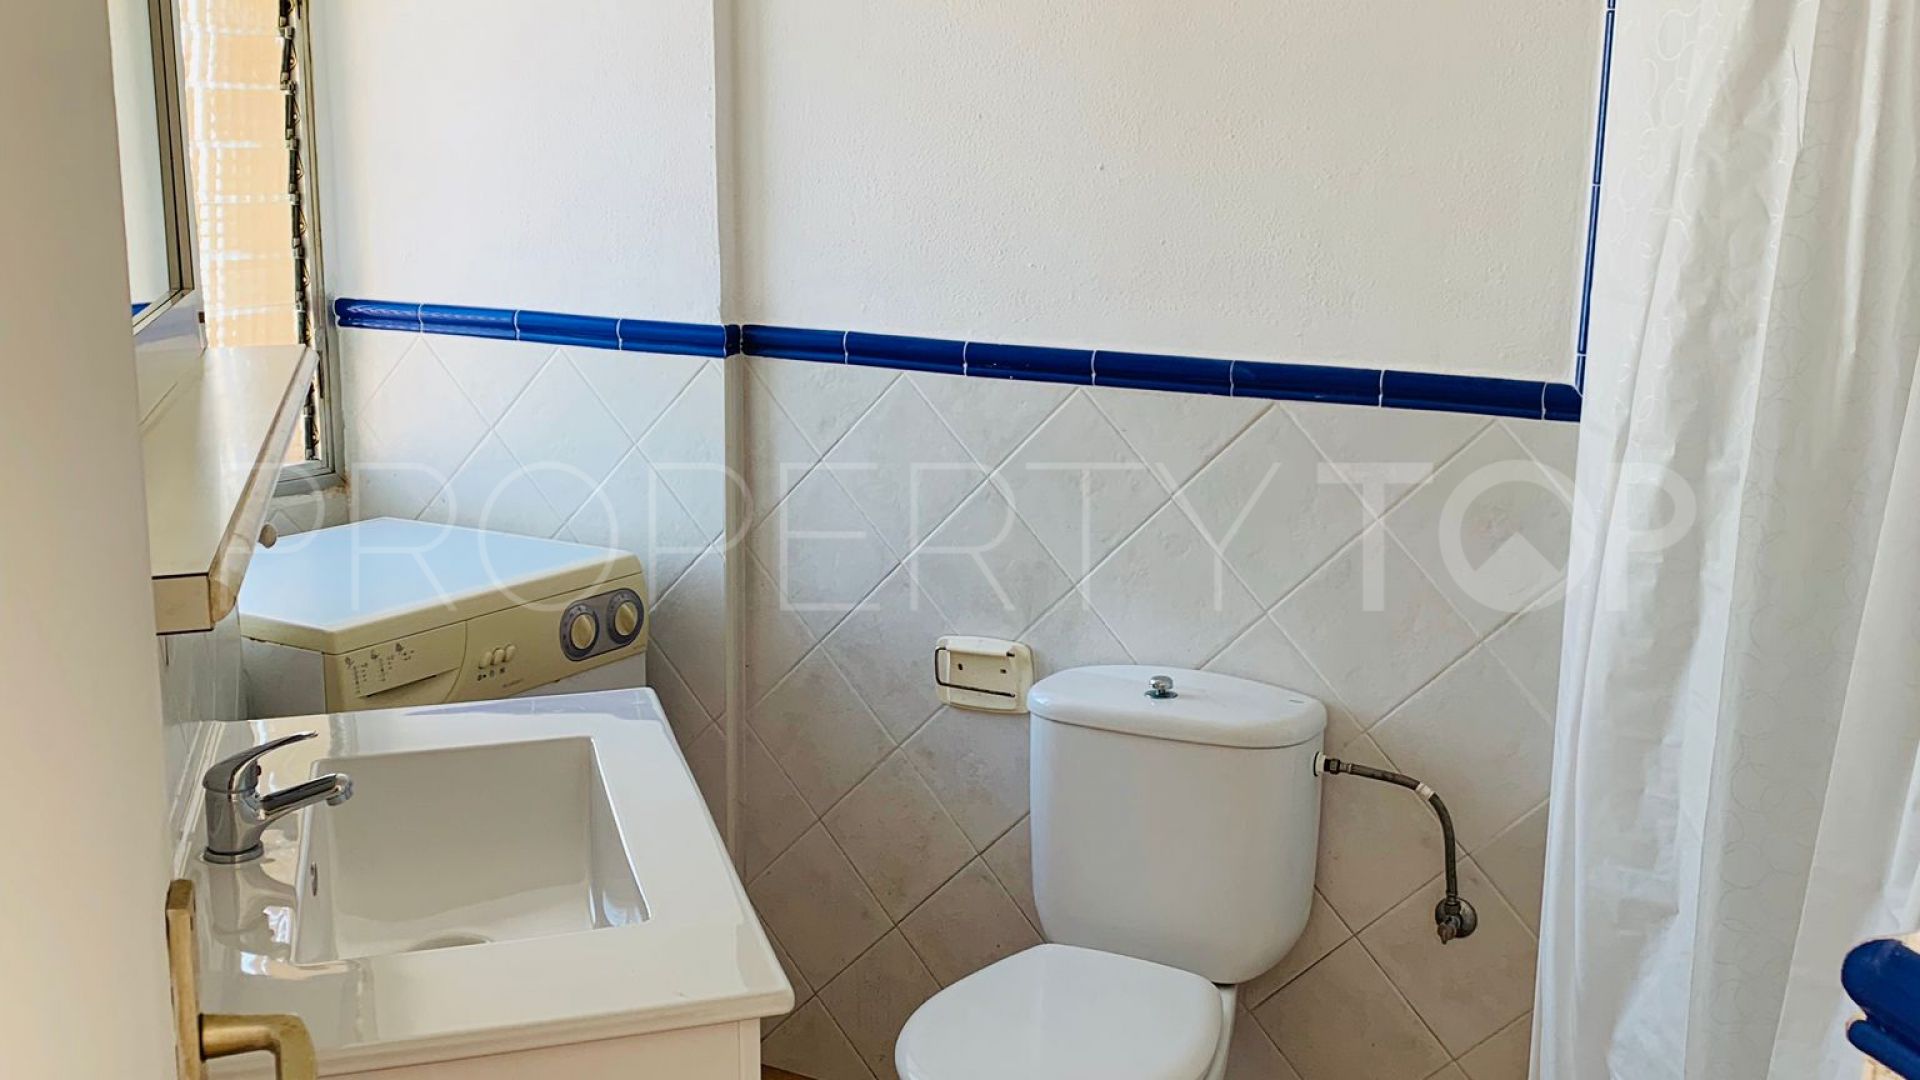 Magaluf 1 bedroom apartment for sale